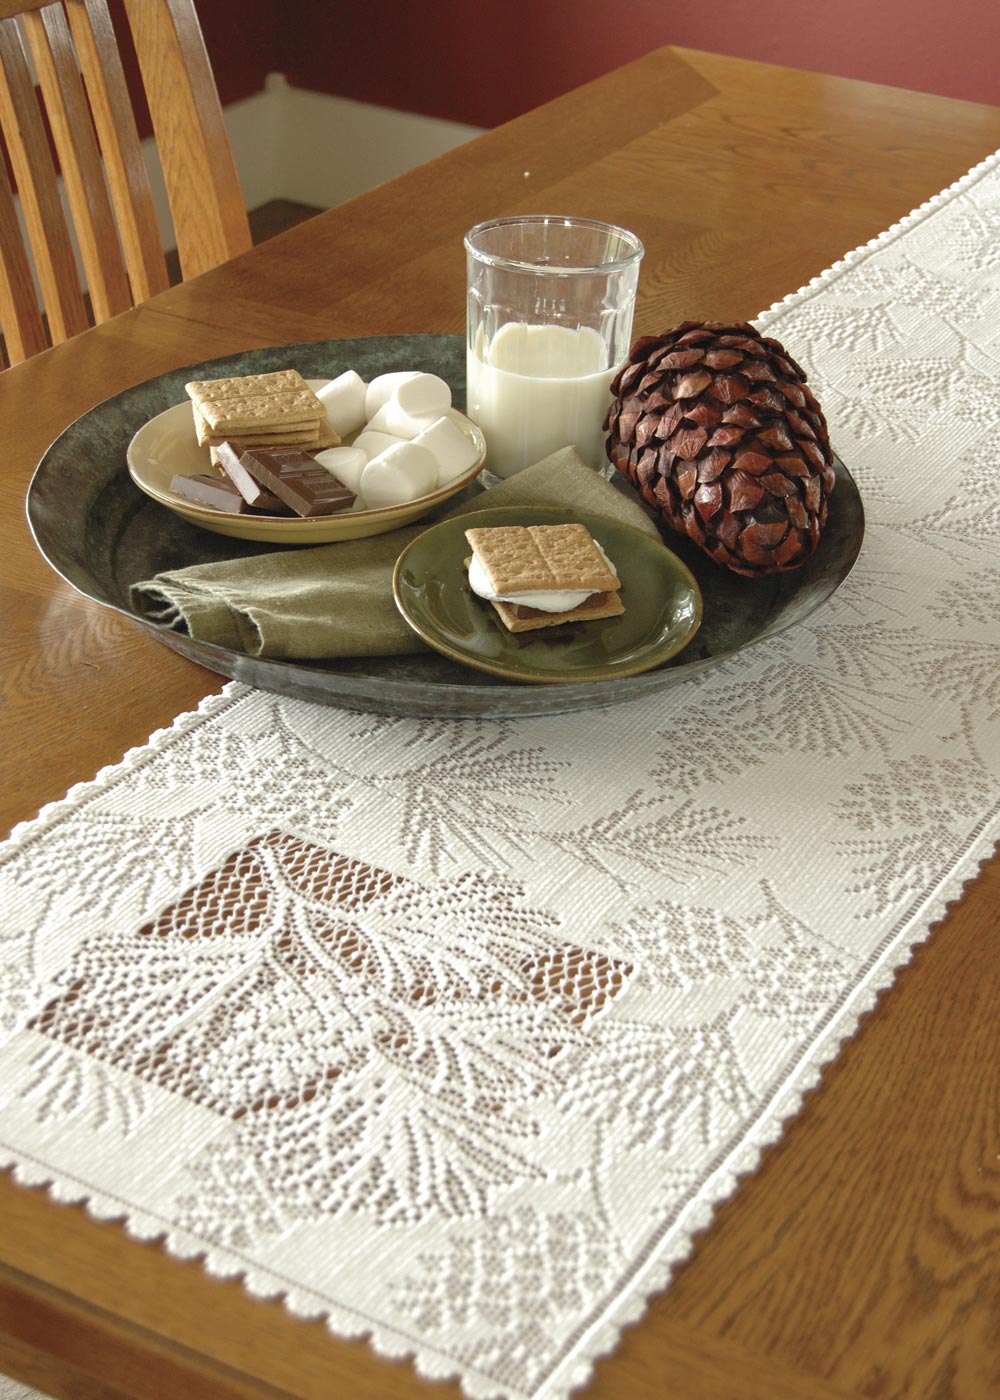 Heritage Lace White WOODLAND 14" x 60" Table Runner 